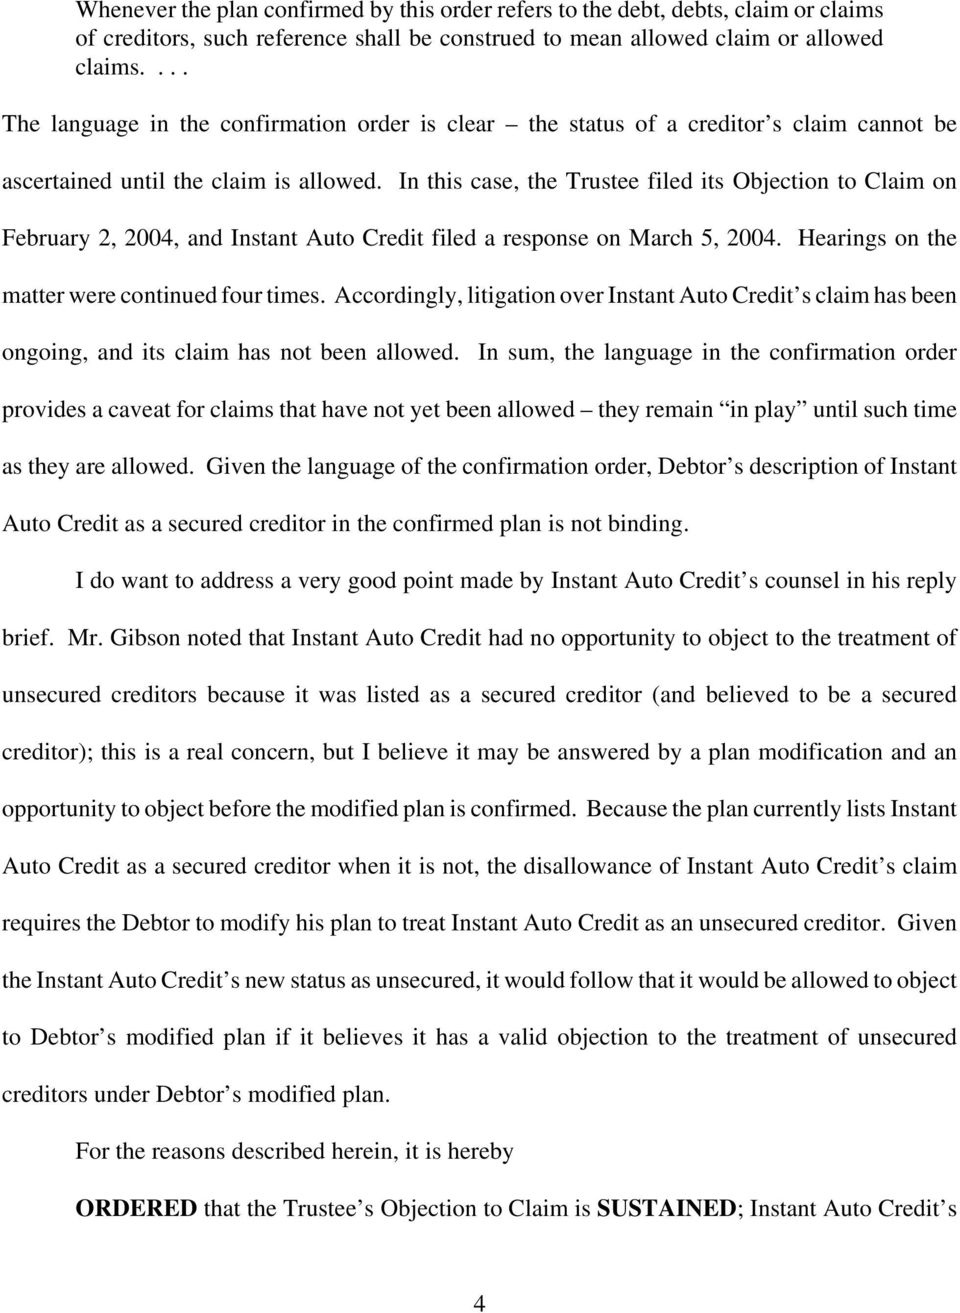 In this case, the Trustee filed its Objection to Claim on February 2, 2004, and Instant Auto Credit filed a response on March 5, 2004. Hearings on the matter were continued four times.